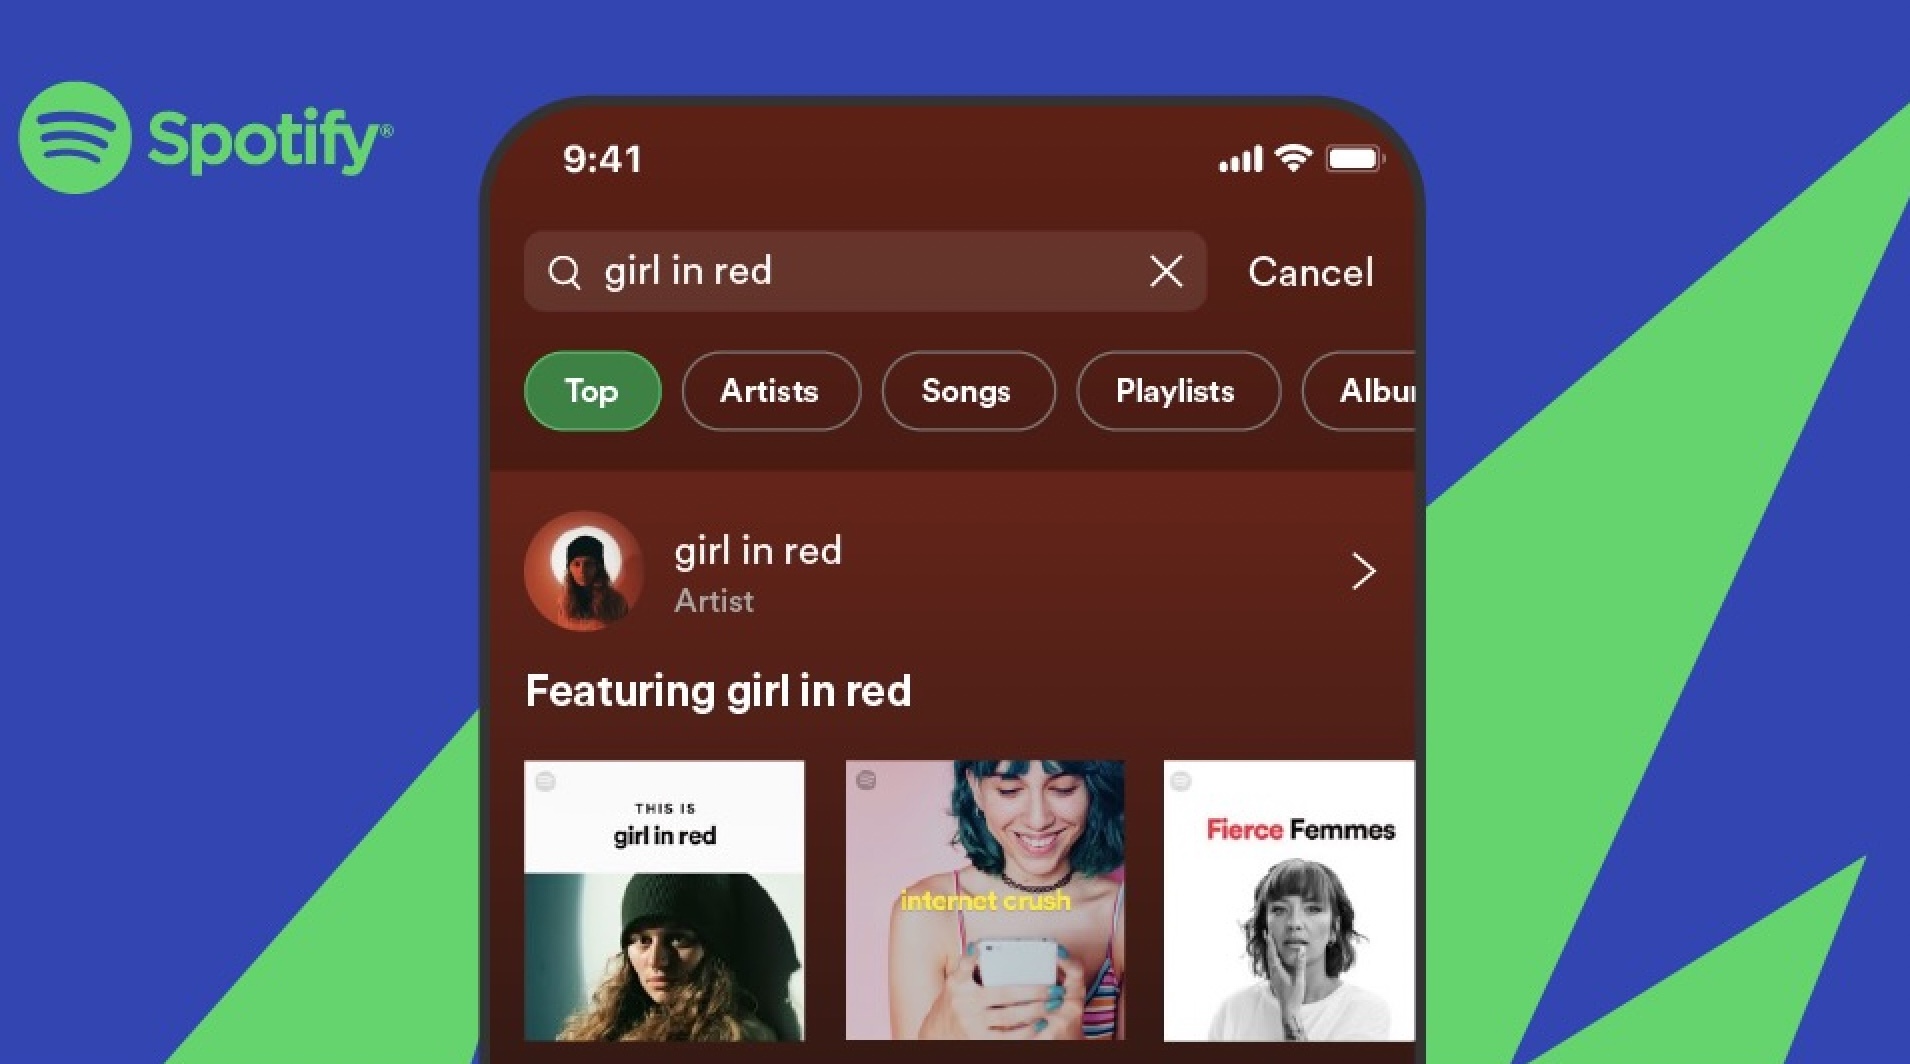 Spotify adds filters to search results on the mobile app